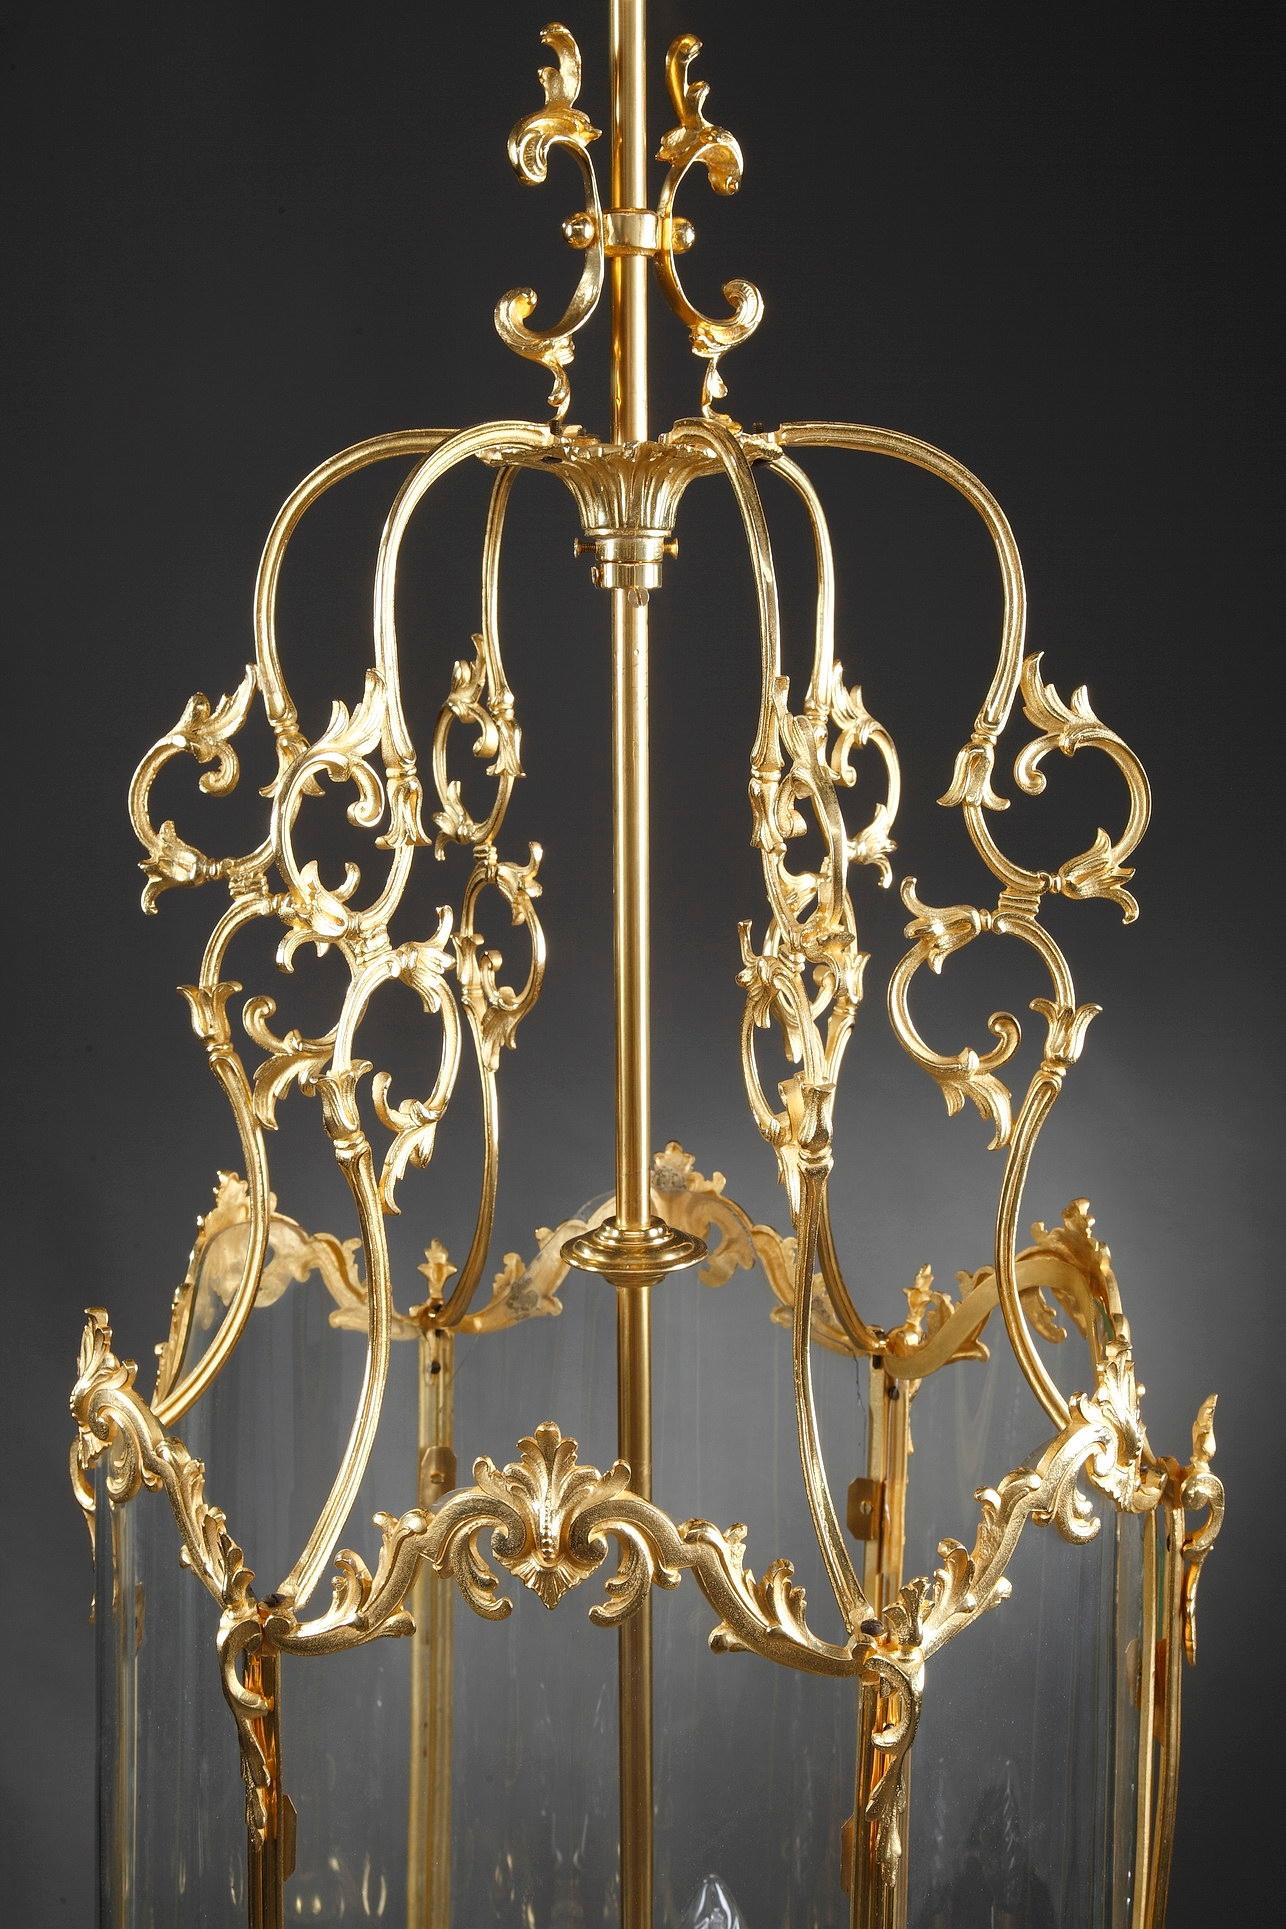 Large ormolu lantern with polylobed mounts decorated with palmettes, acanthus leaves and foliated scrolls. This naturalist decoration is inspired by the Louis XV style. This entrance hall lantern has three bulbs. Napoleon III period.

circa